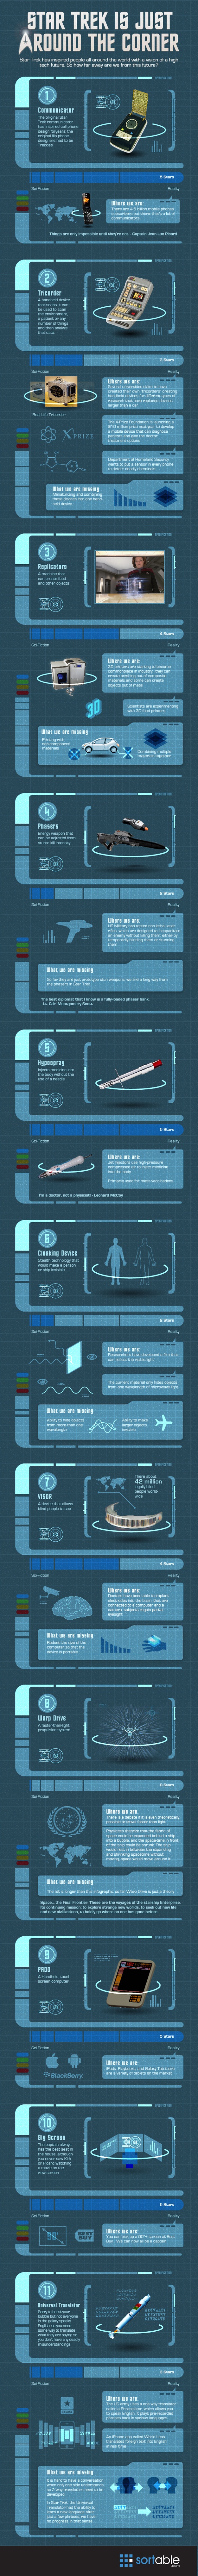 Star Trek Technology: It’s Closer Than You Think [Infographic]